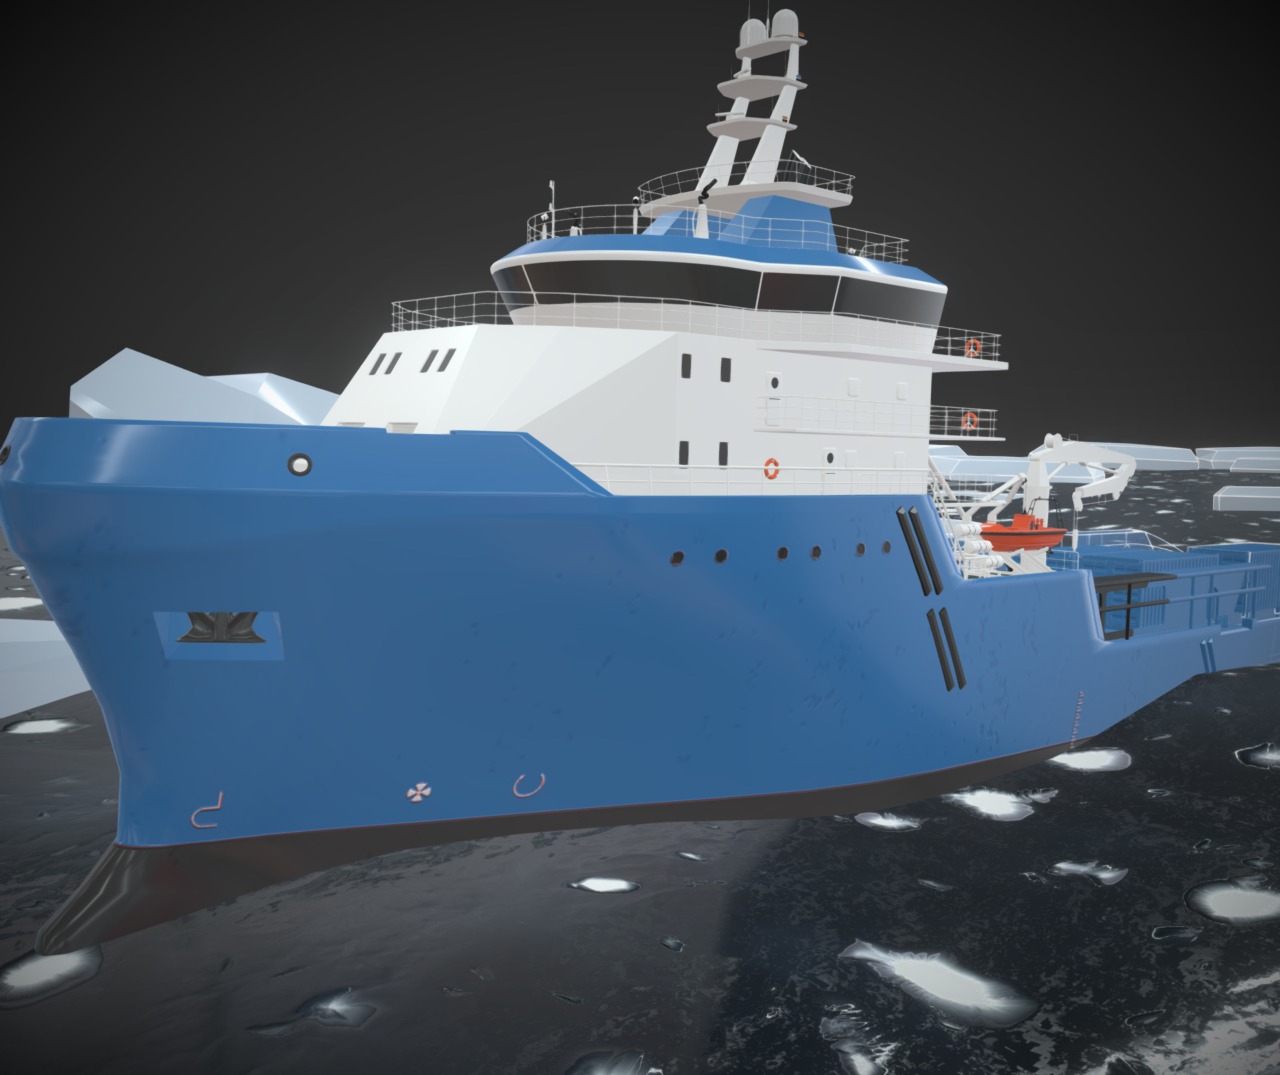 Ship modelling project made for Technology Research Center, University of Turku. Used for service marketing purpose:
http://www.virtualexpo.fi/group_of_companies/arctic-waypoint-finland/ - Arctic Ship Concept - 3D model by Elomatic Advanced Technologies (@advancedtechnologies) 3d model